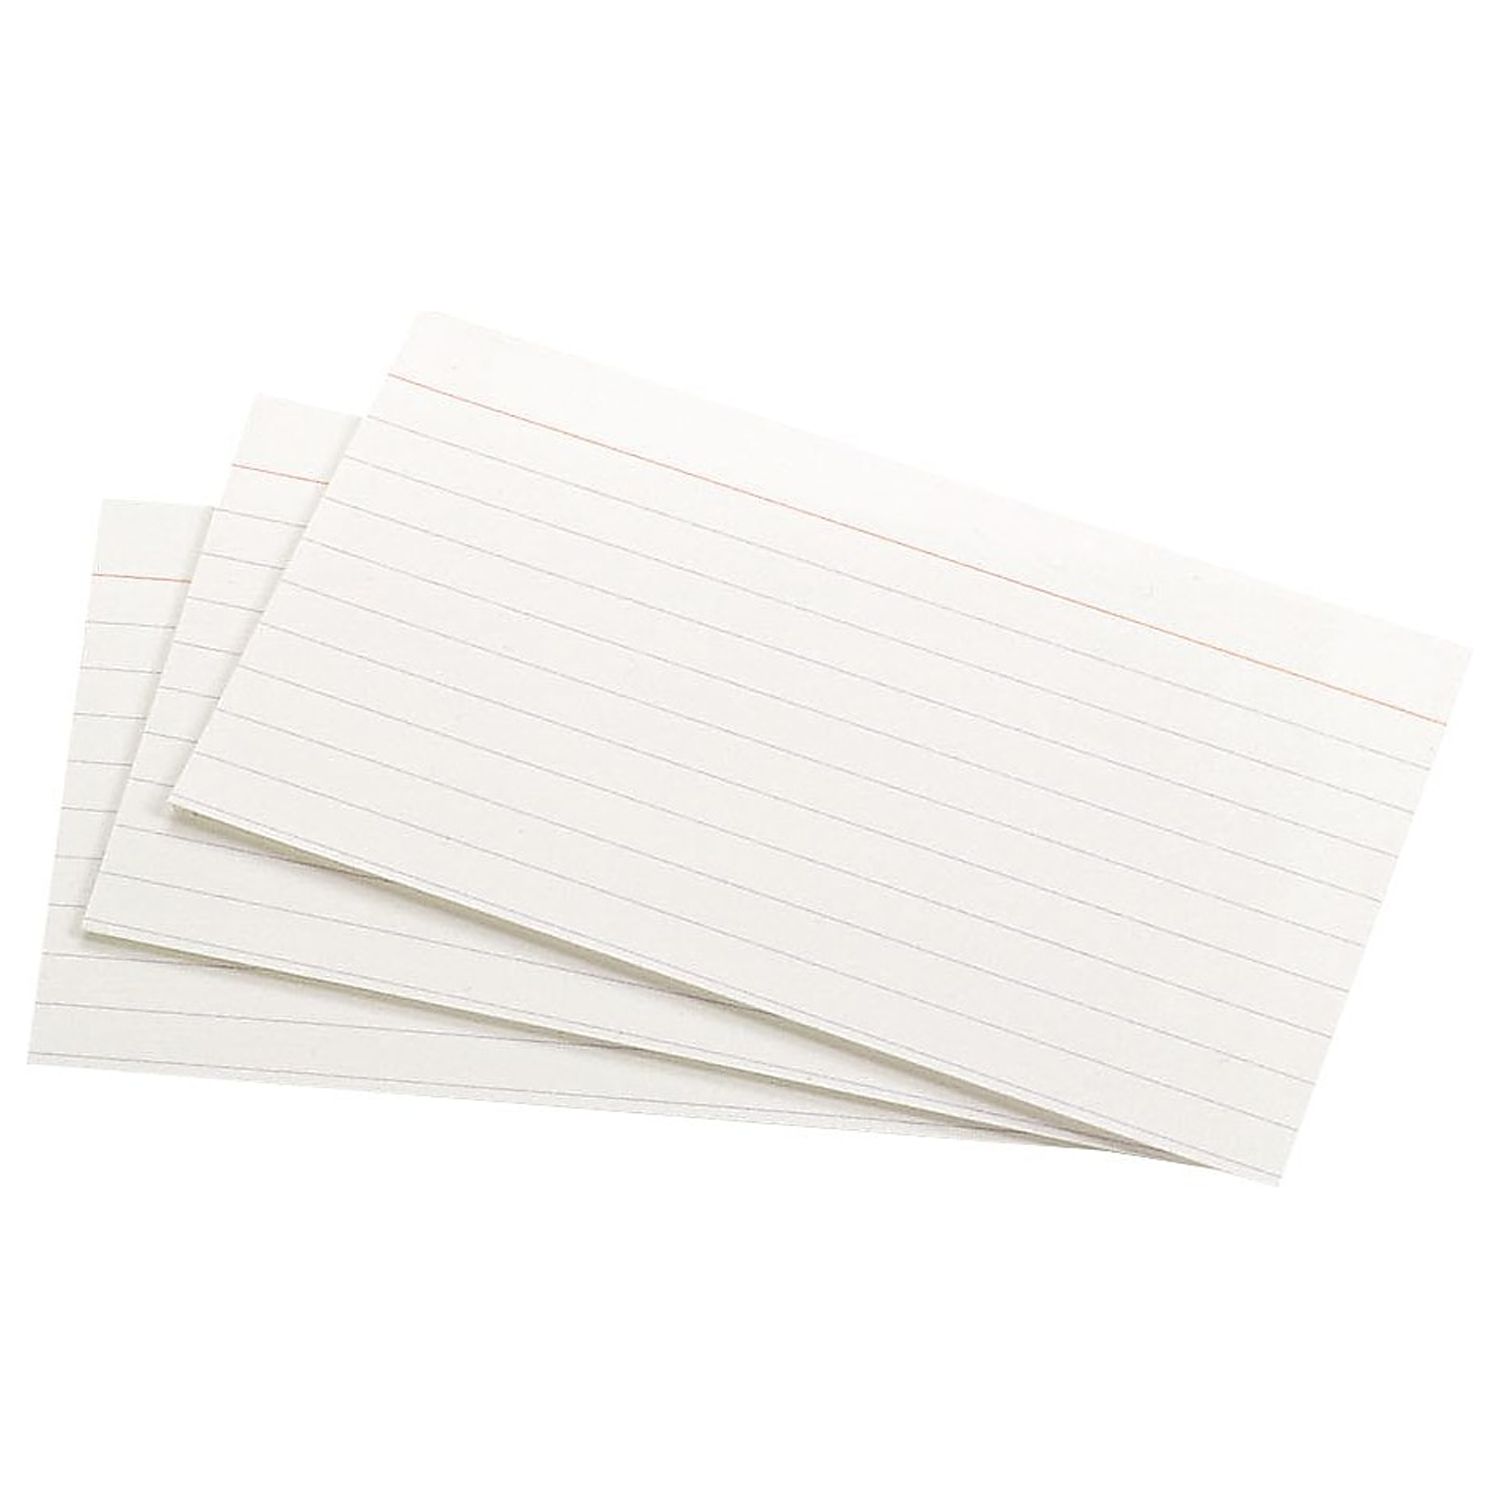 Oxford Ruled Index Cards, 3 x 5, White, 100/Pack (31) - image 4 of 4